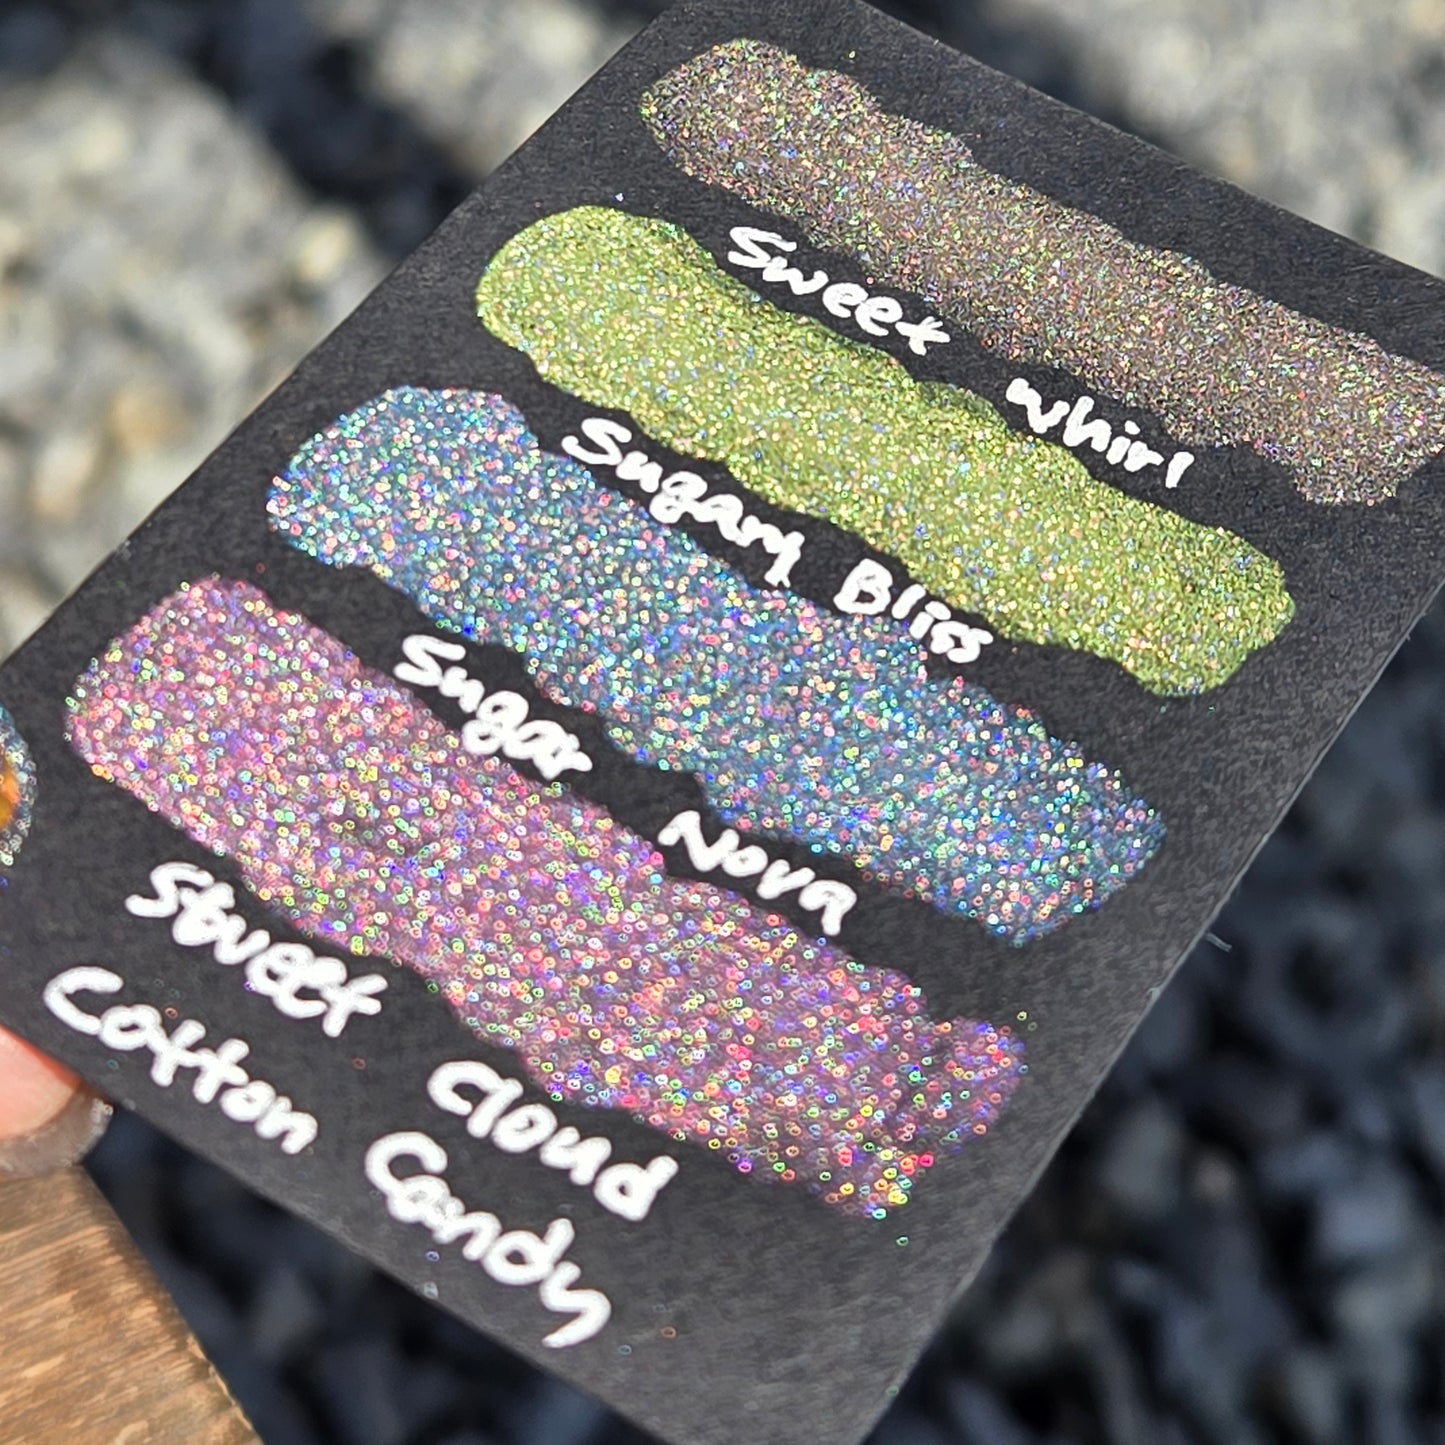 Sweet Whirl Half Pan Cotton Candy Handmade Chrome Shimmer Holographic Watercolor Paints by iuilewatercolors